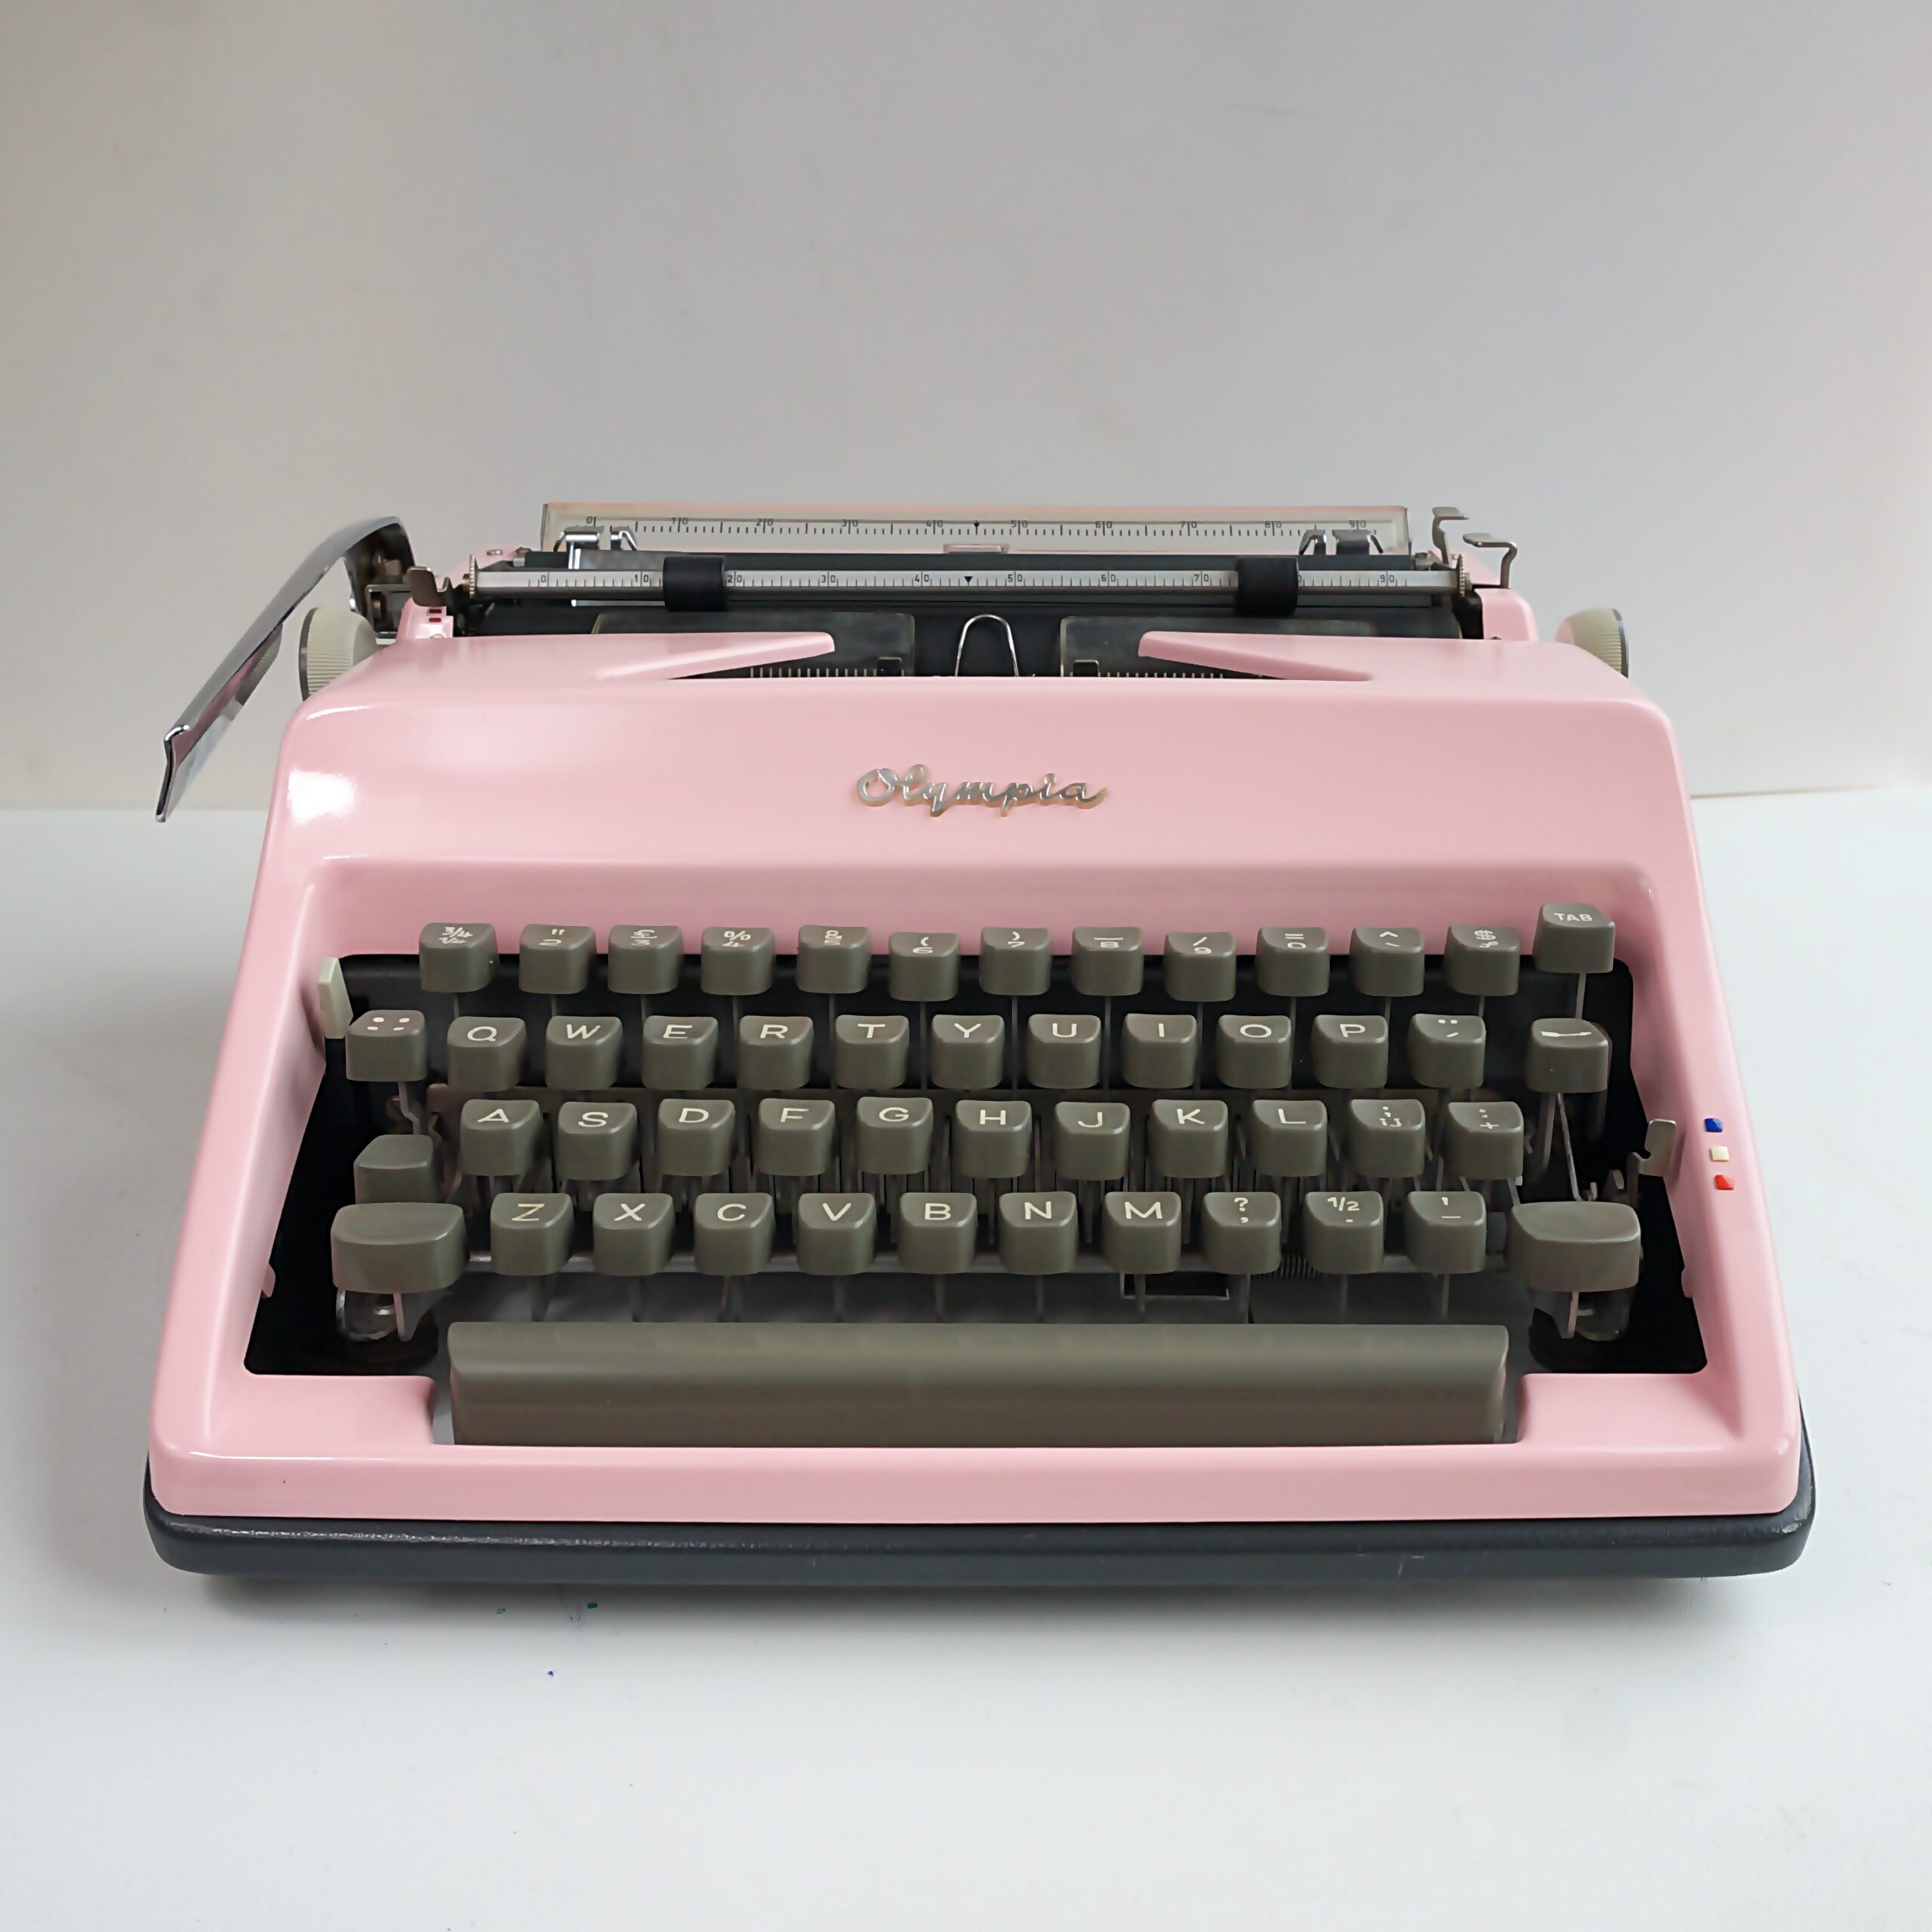 Pink Typewriter - Olympia SM9 For Sale - My Cup Of Retro Typewriter Store